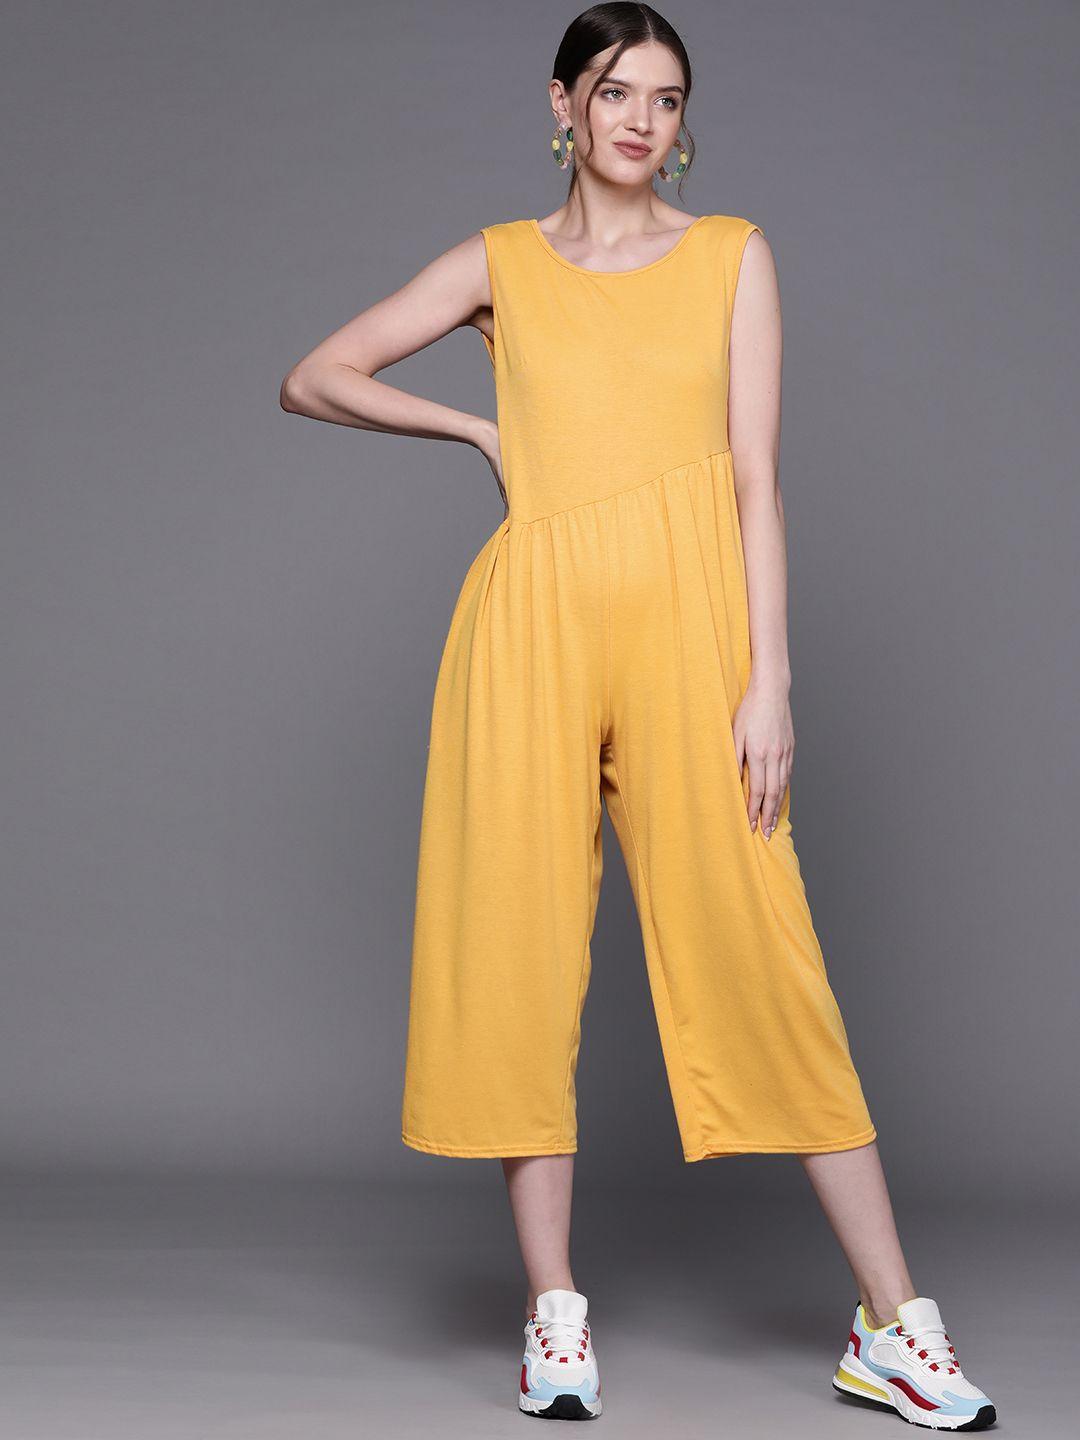 jc mode yellow solid pure cotton basic jumpsuit